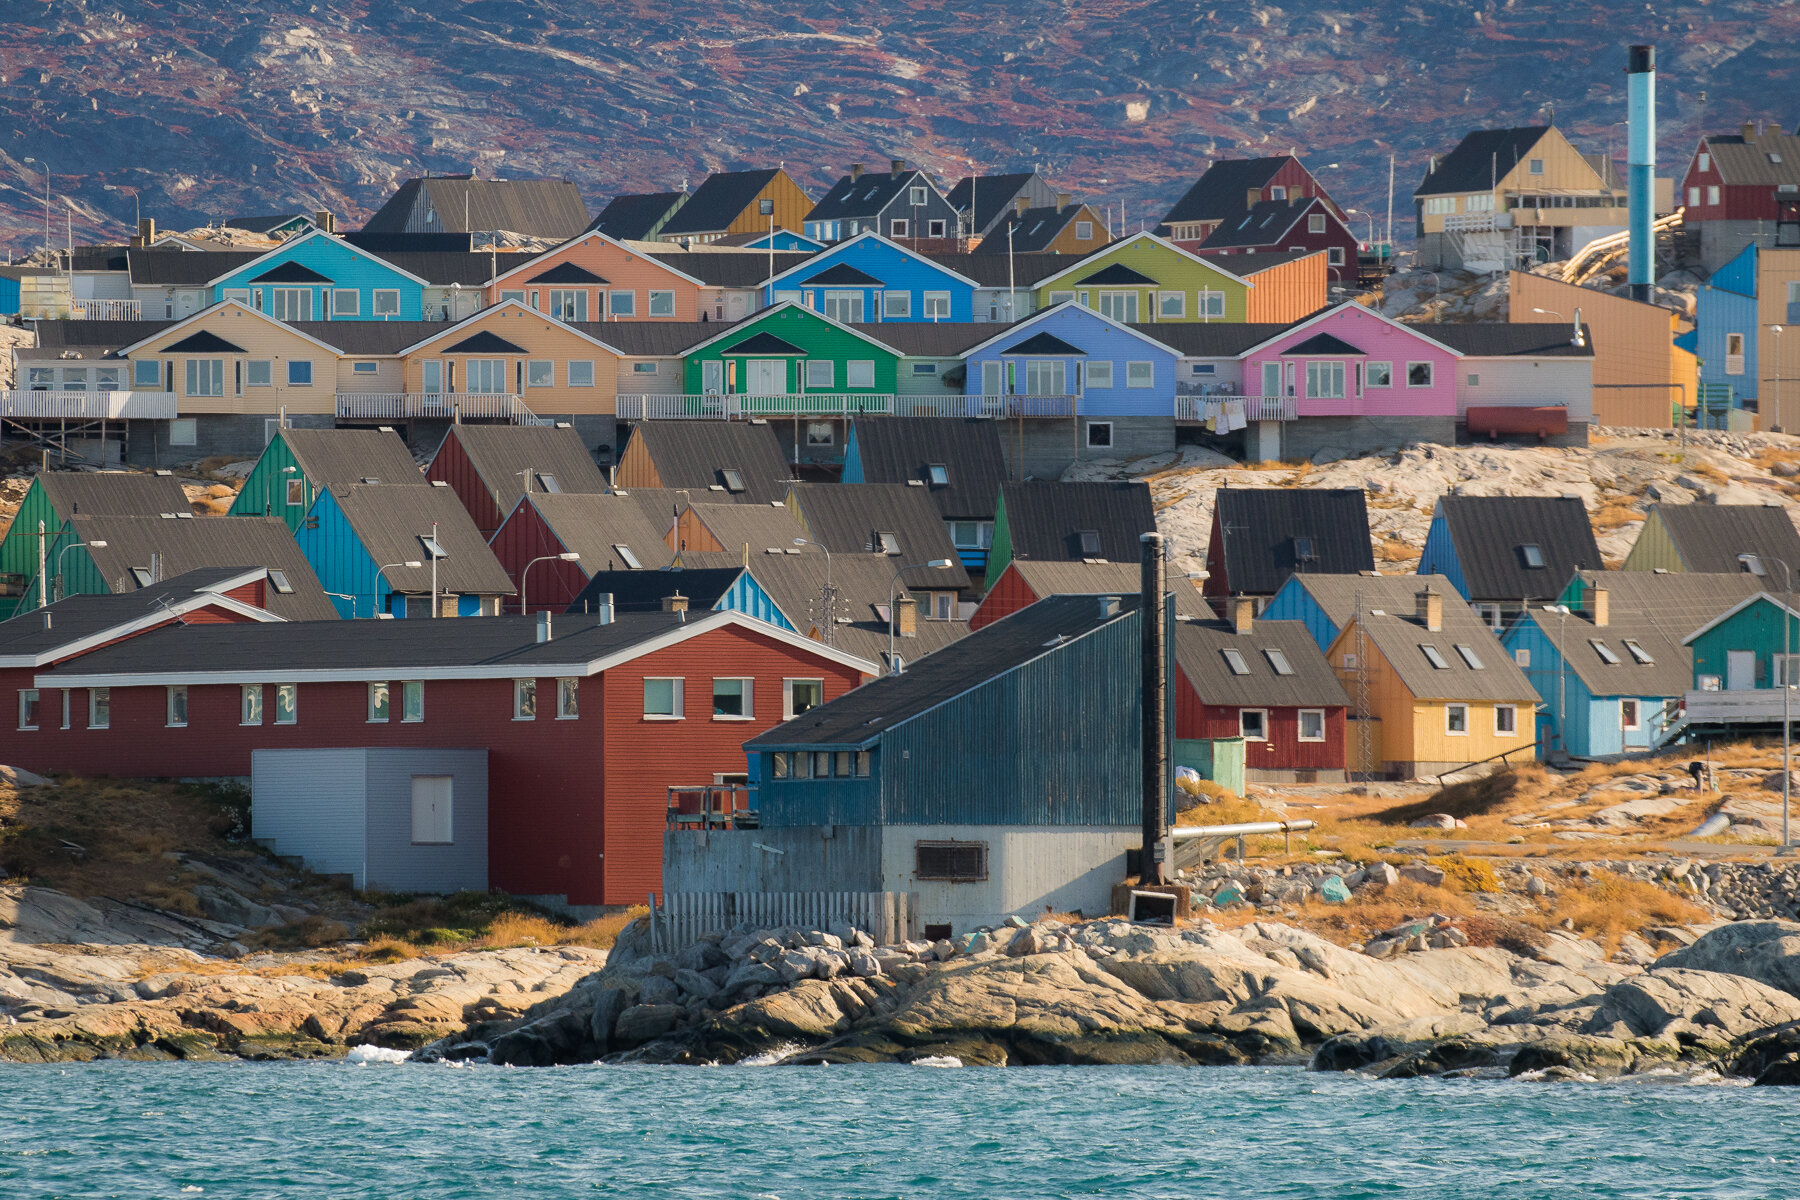  Greenland - Ilulissat- Colorful town as seen from the water 